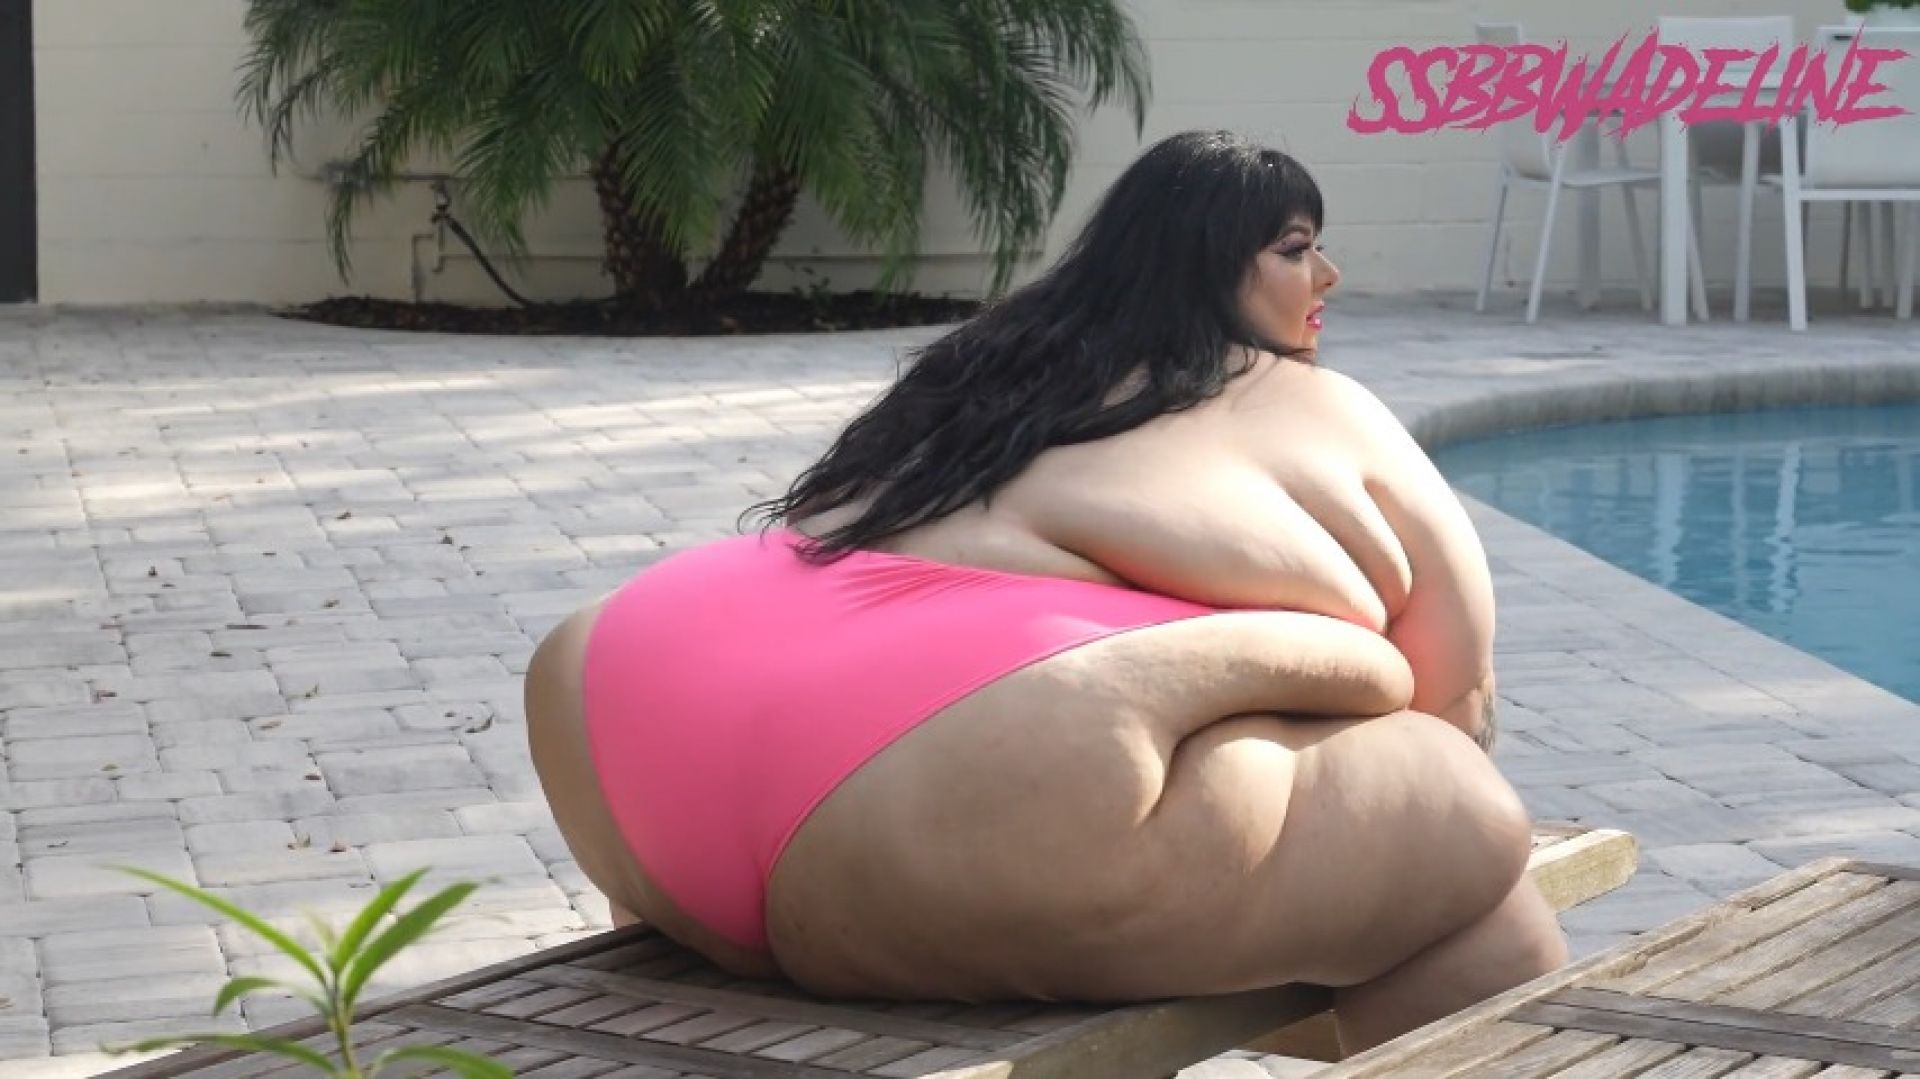 leaked SSBBW Adeline Shows Off Her Bountiful Body in the Sun video thumbnail